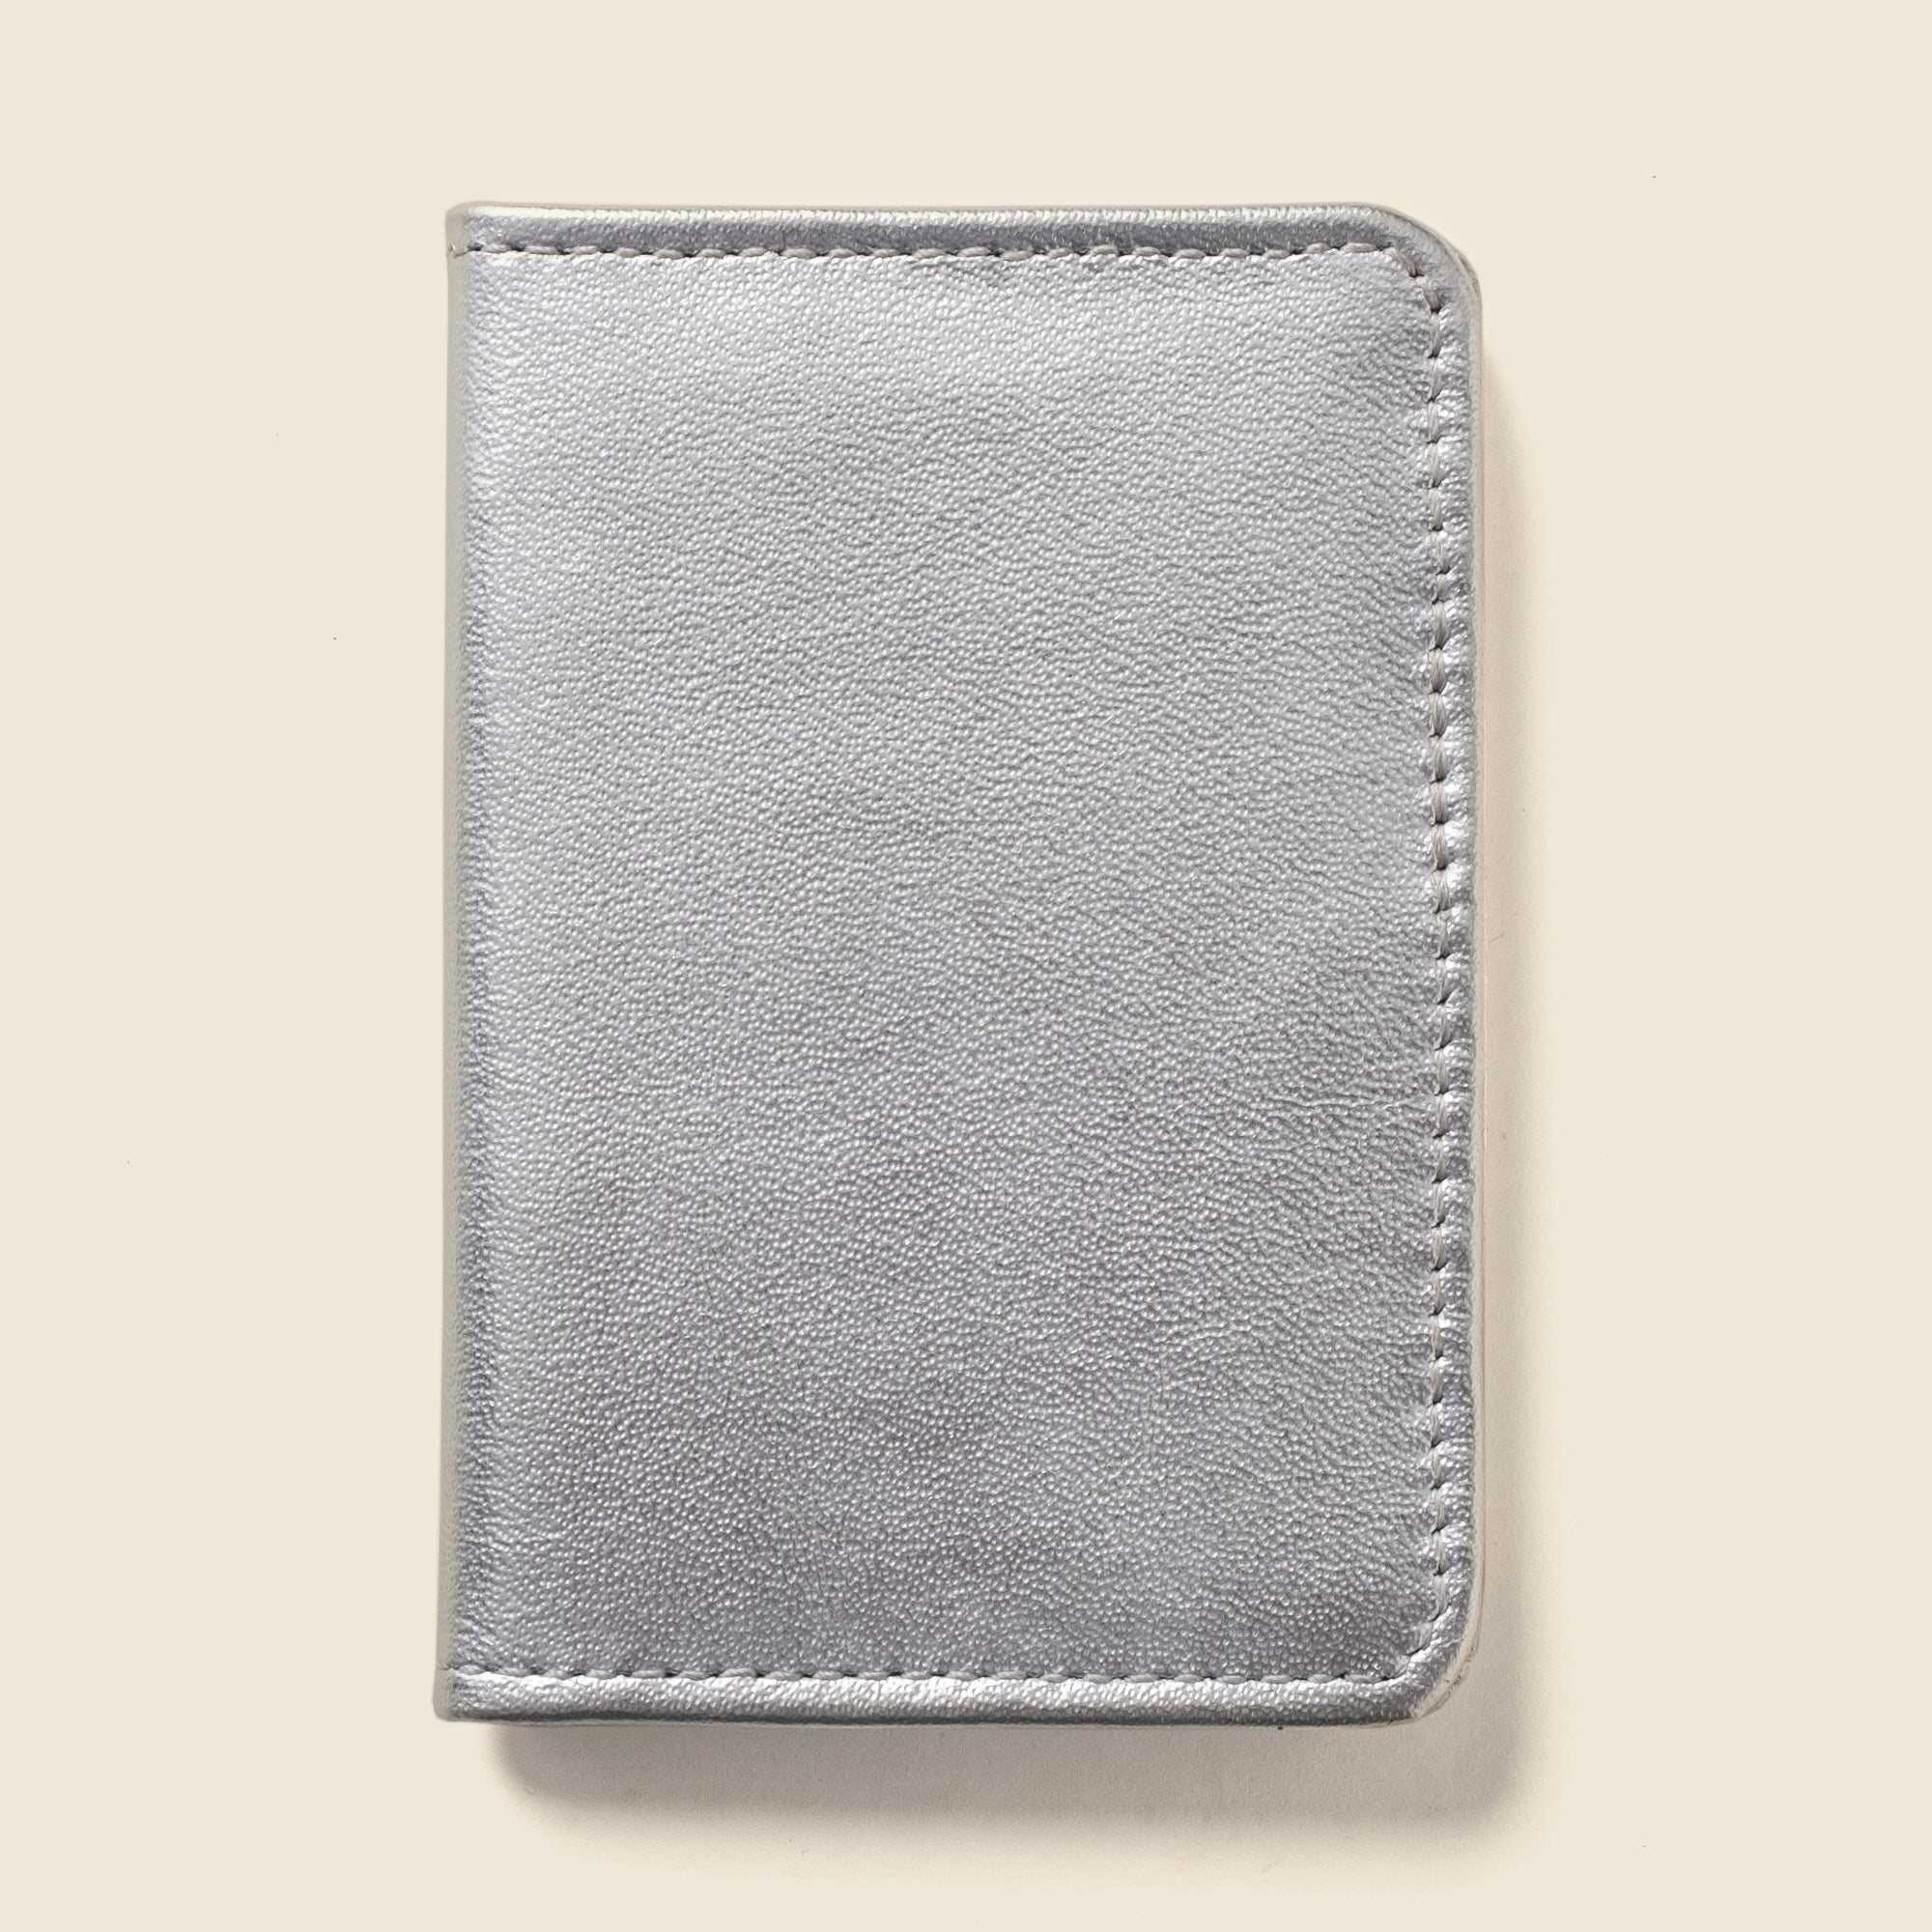 Silver leather bifold wallet from Casupo for women